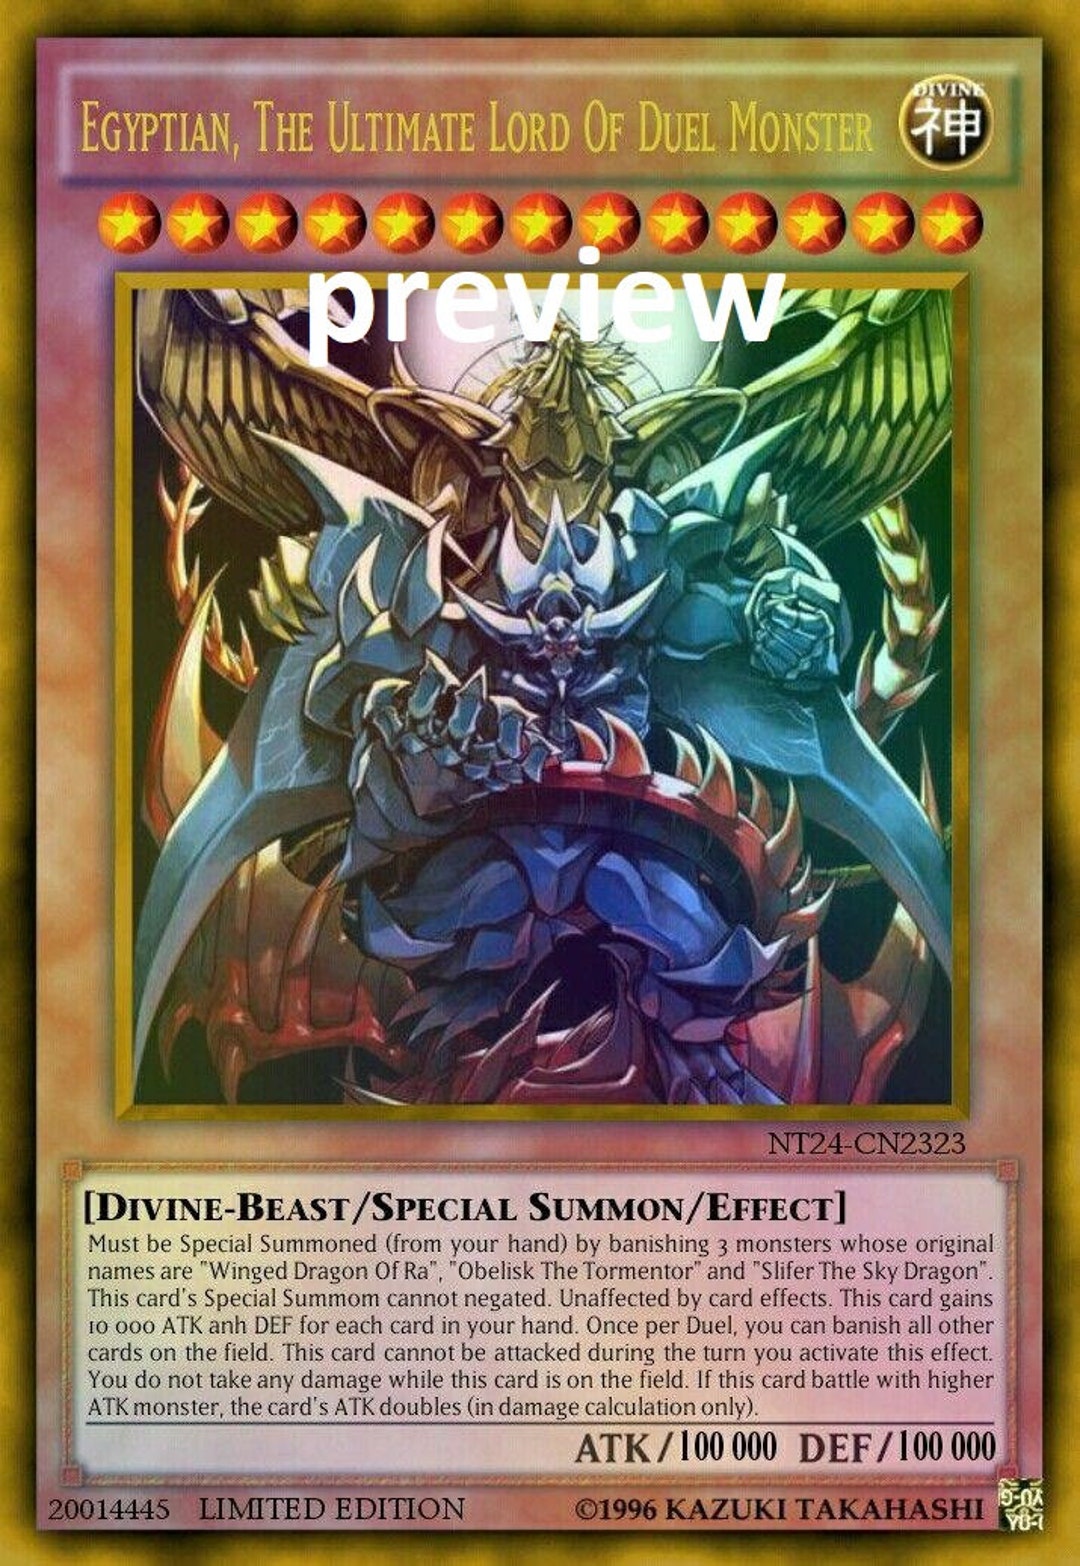 Egyptian The Ultimate Lord Of Duel Monster Orica Custom Card Etsy Uk